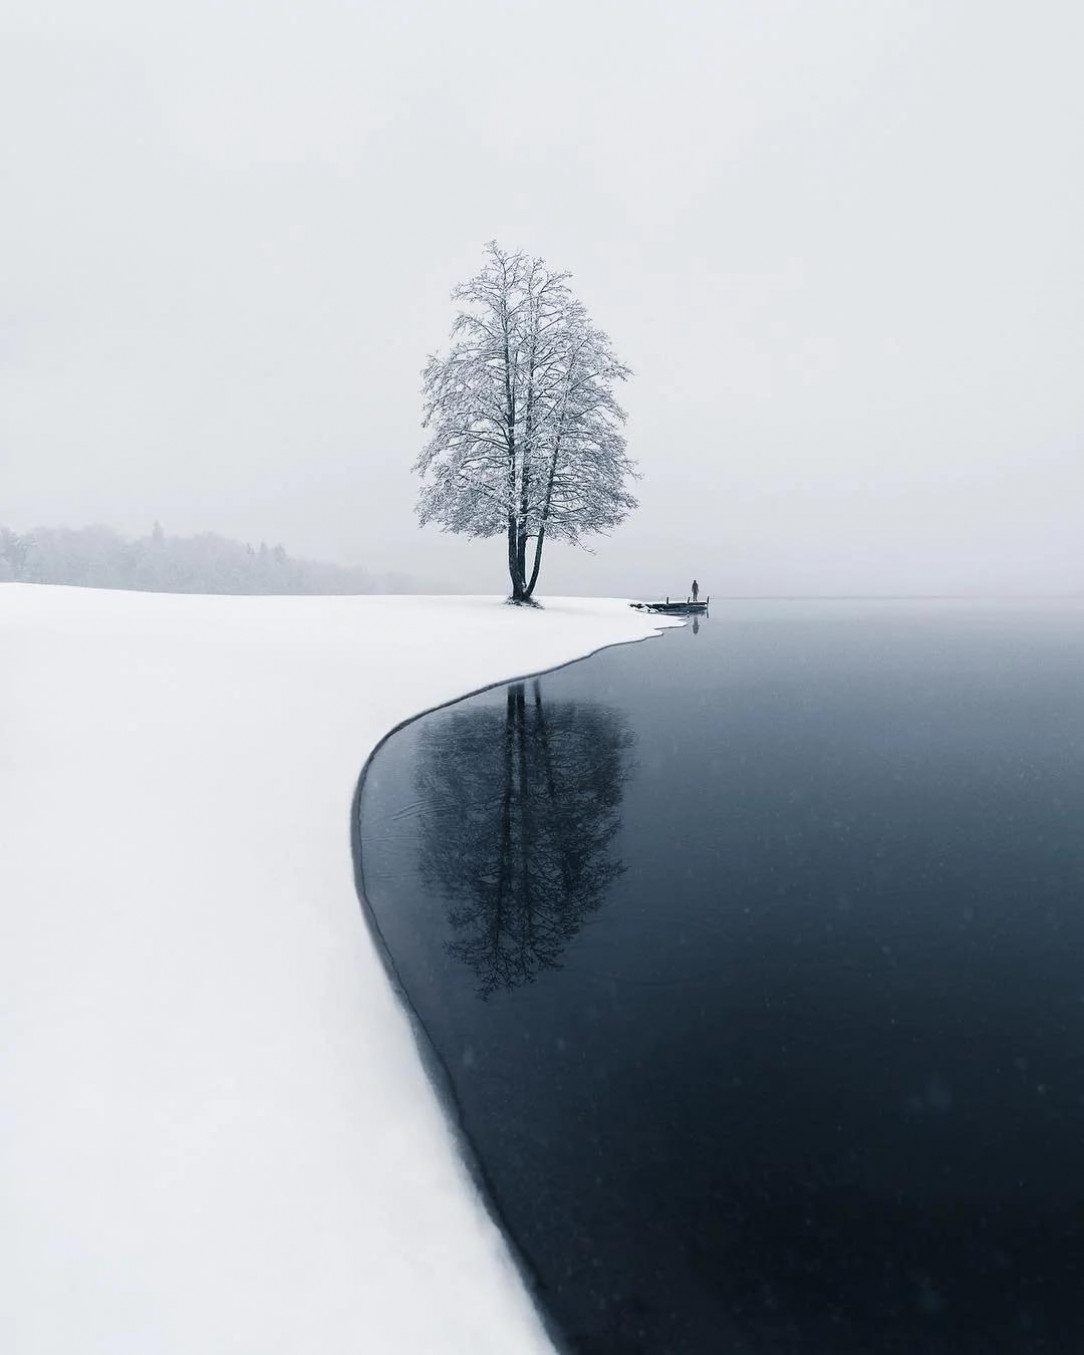 Lonely tree with snow covered in, in the misty mist in Järvenpää, Finland